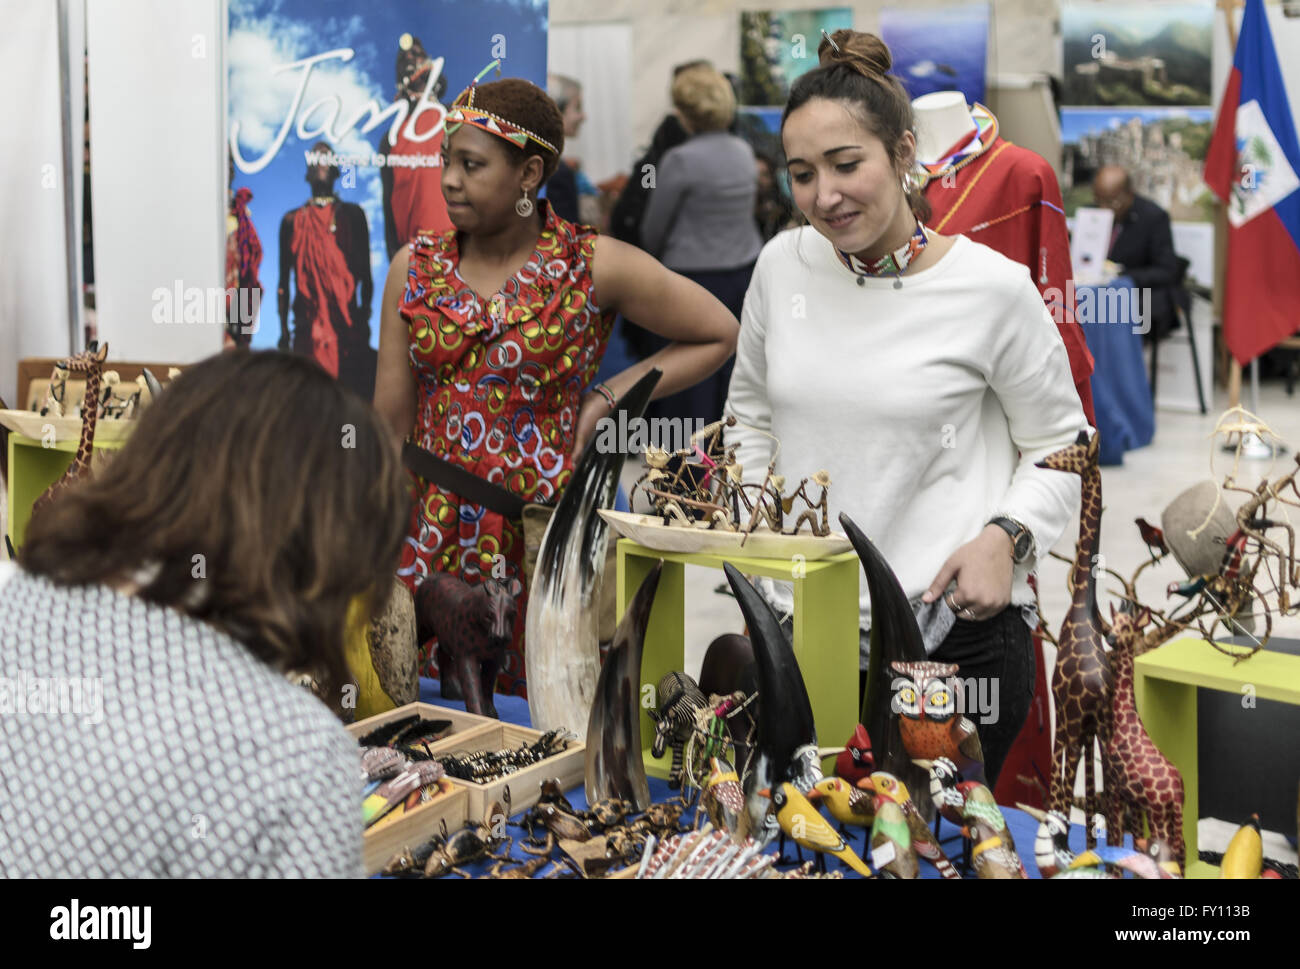 A Kenya stand view in Kermés exhibition, 16 th April 2016, Congress Palace, Madrid city, Spain Stock Photo